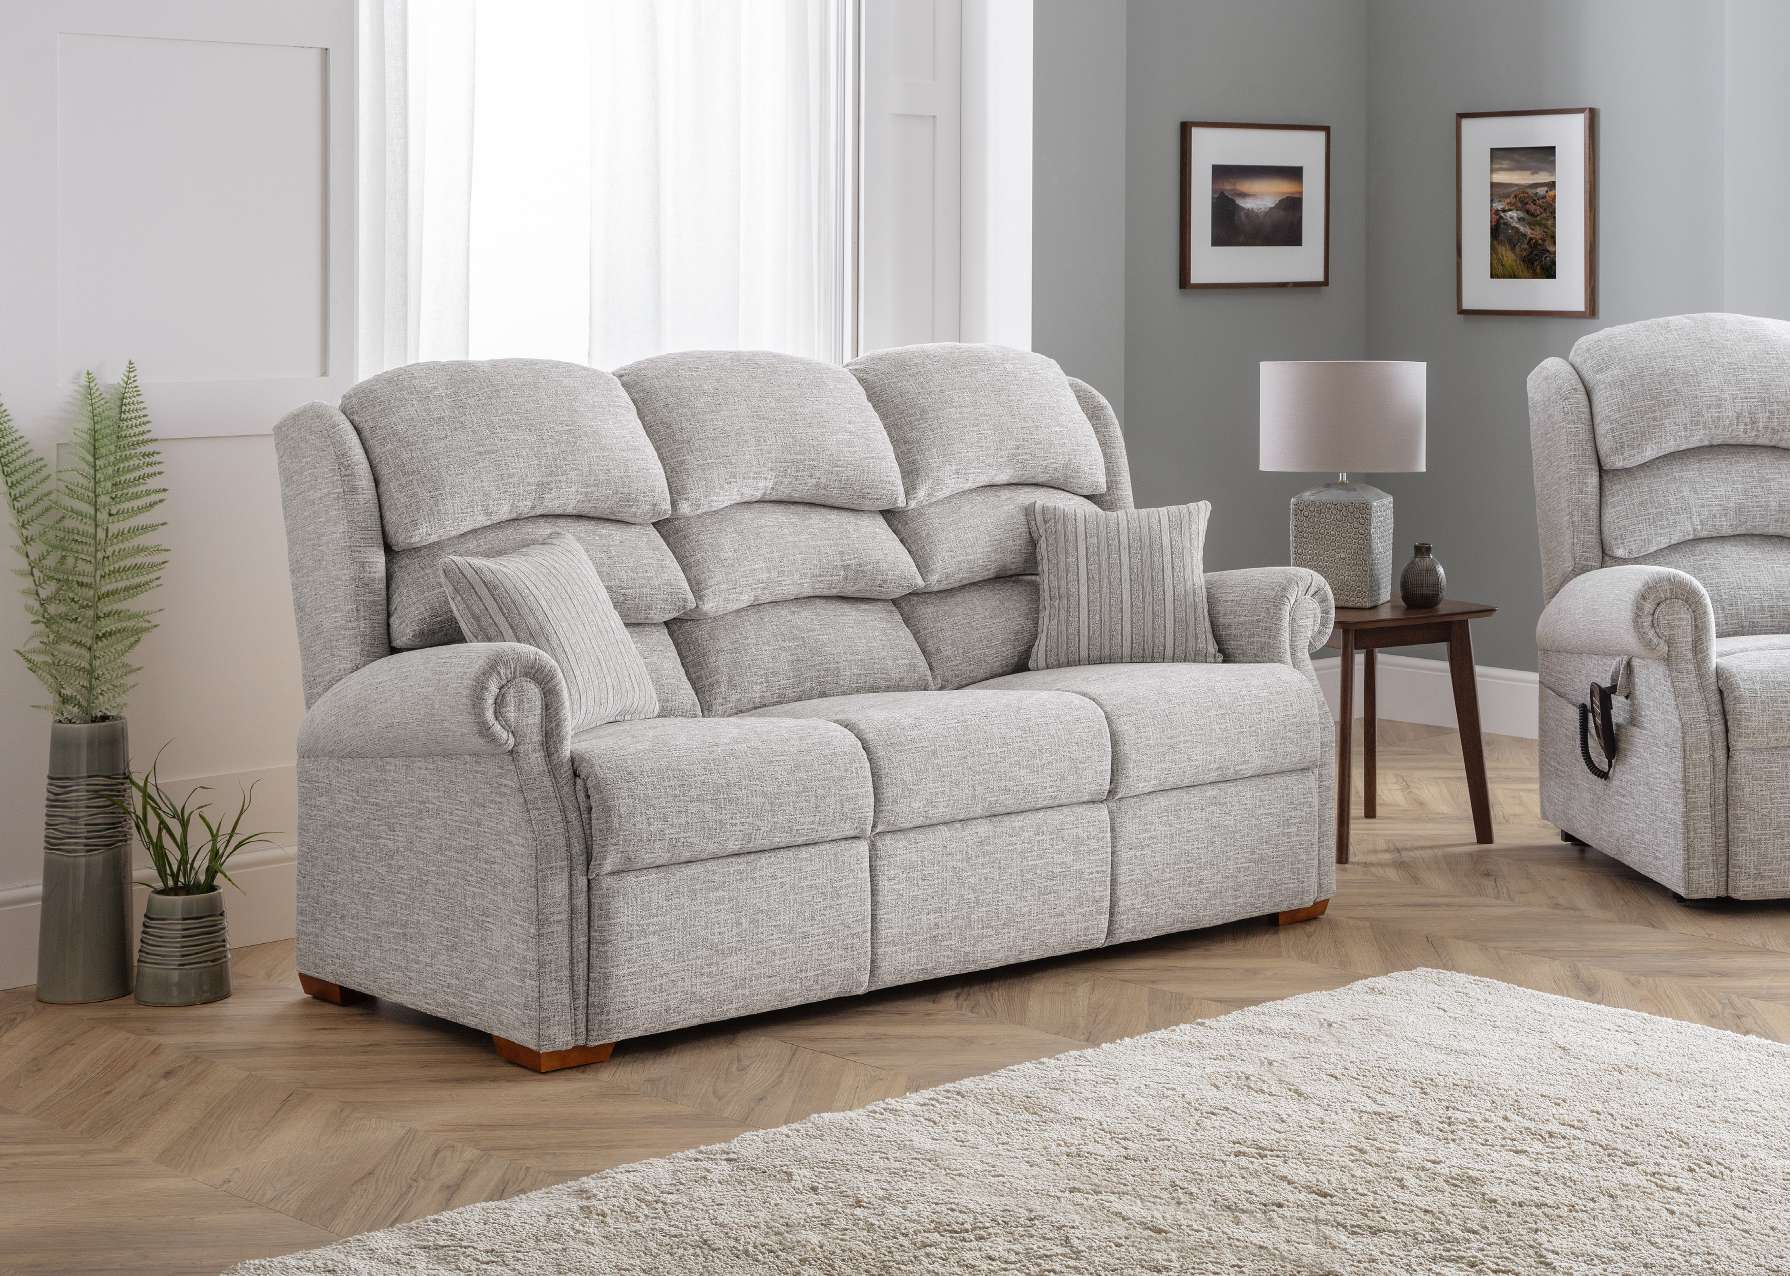 Dorchester Sofa - Fast Delivery - Life and Mobility